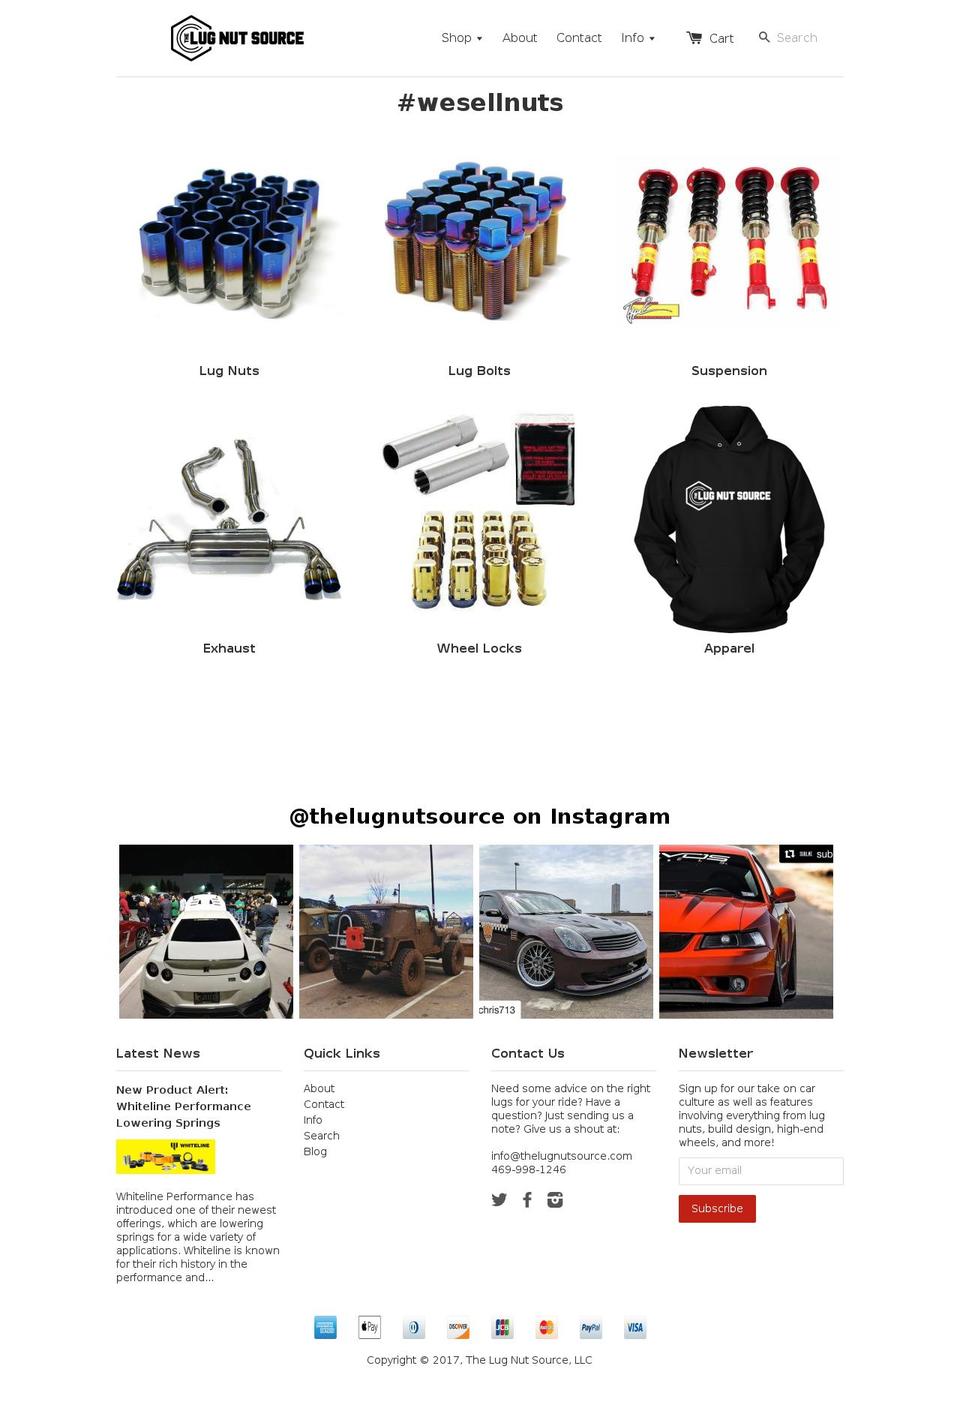 Supply Shopify theme site example thelugnutsource.com